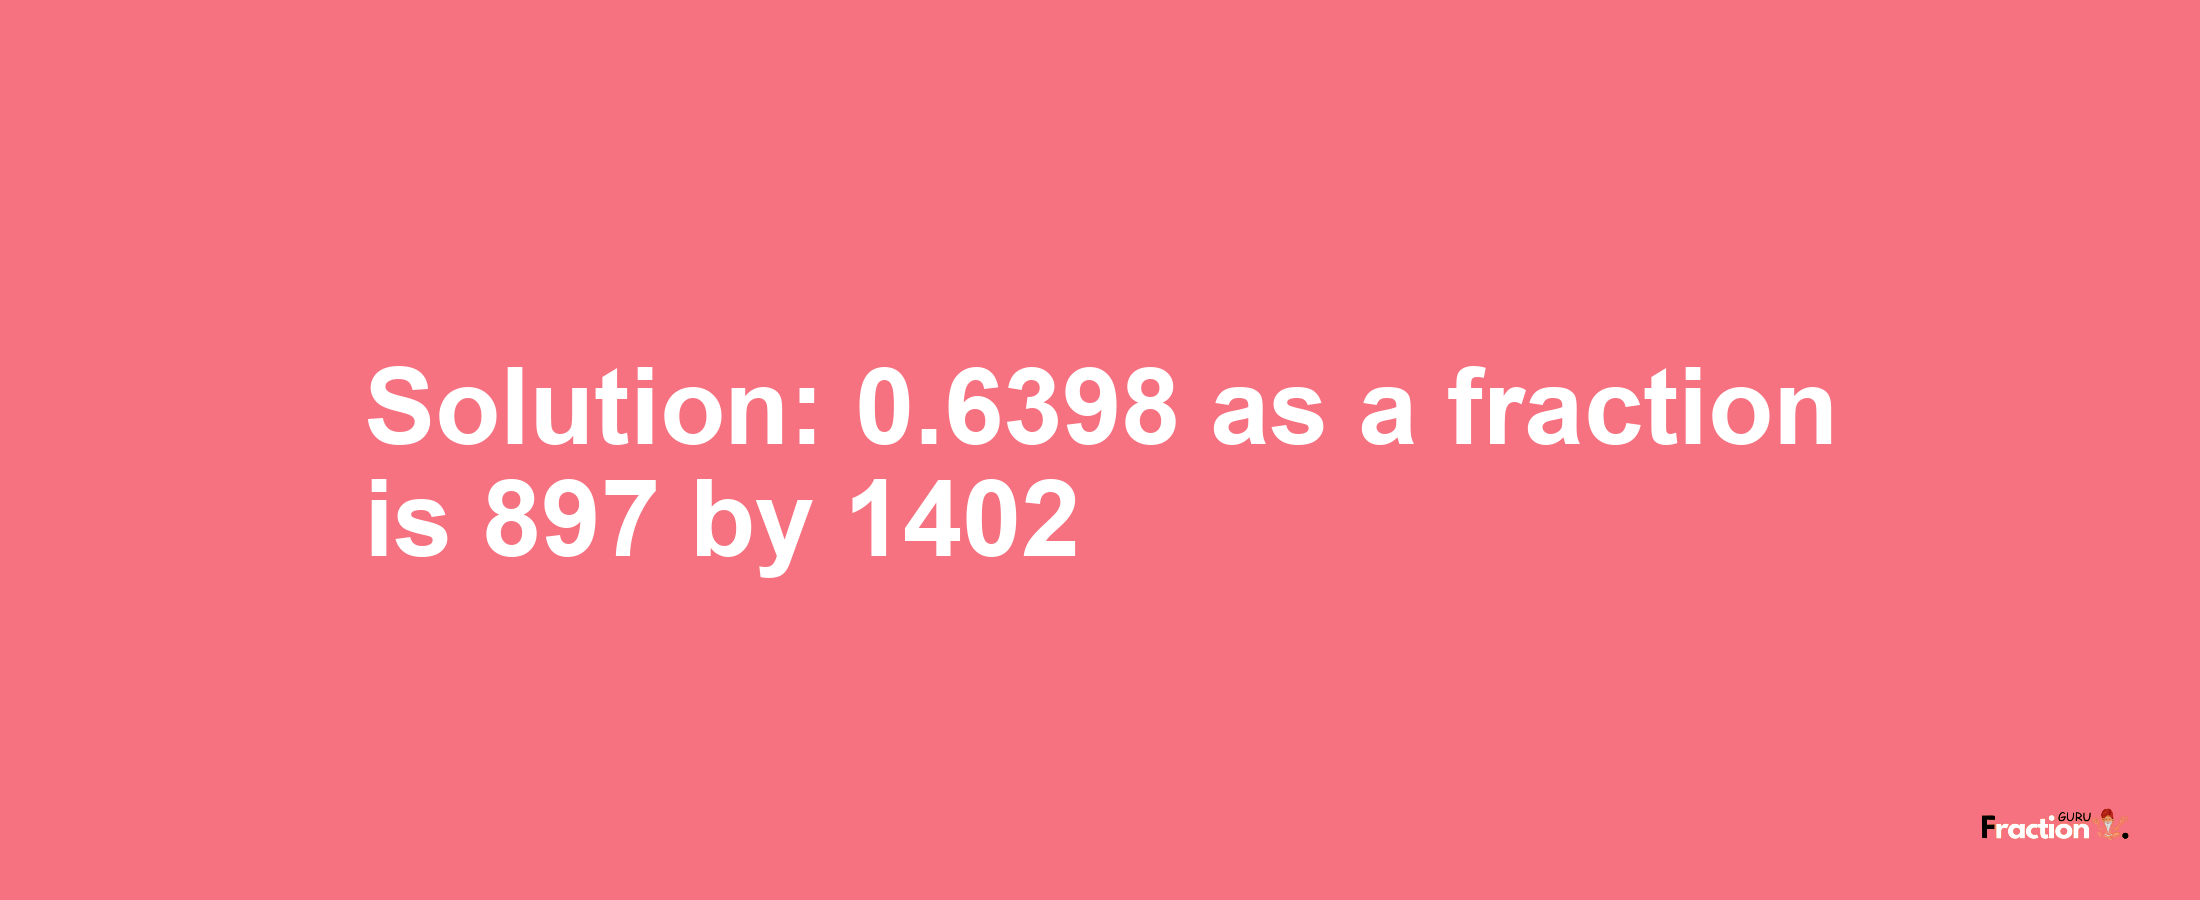 Solution:0.6398 as a fraction is 897/1402